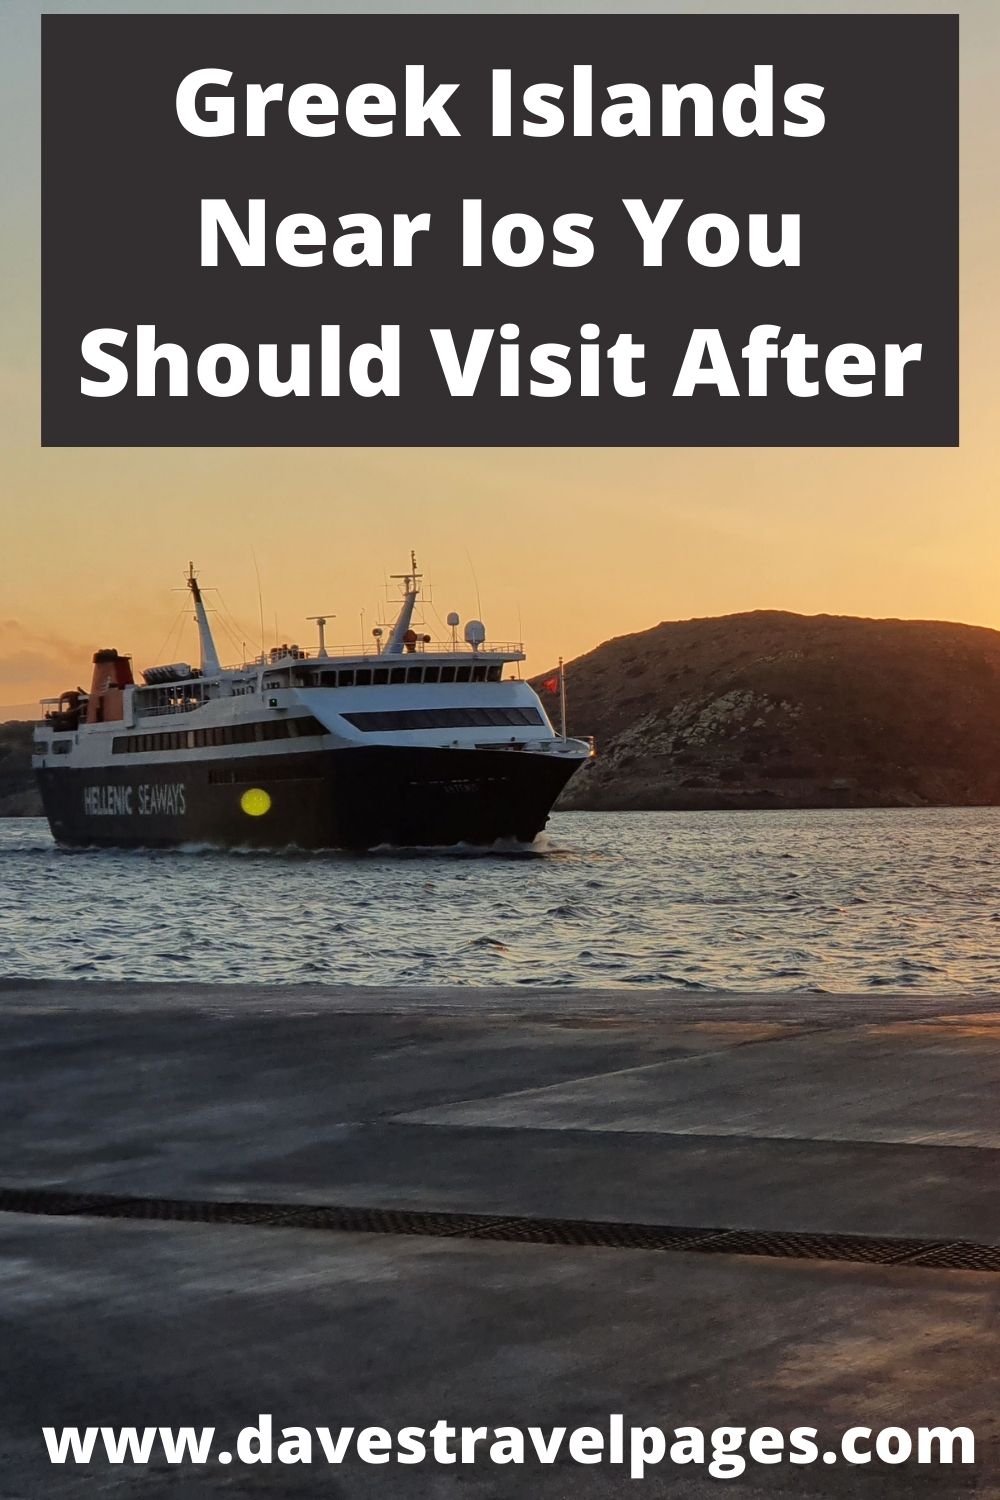 A guide to which Greek islands you should visit next after Ios